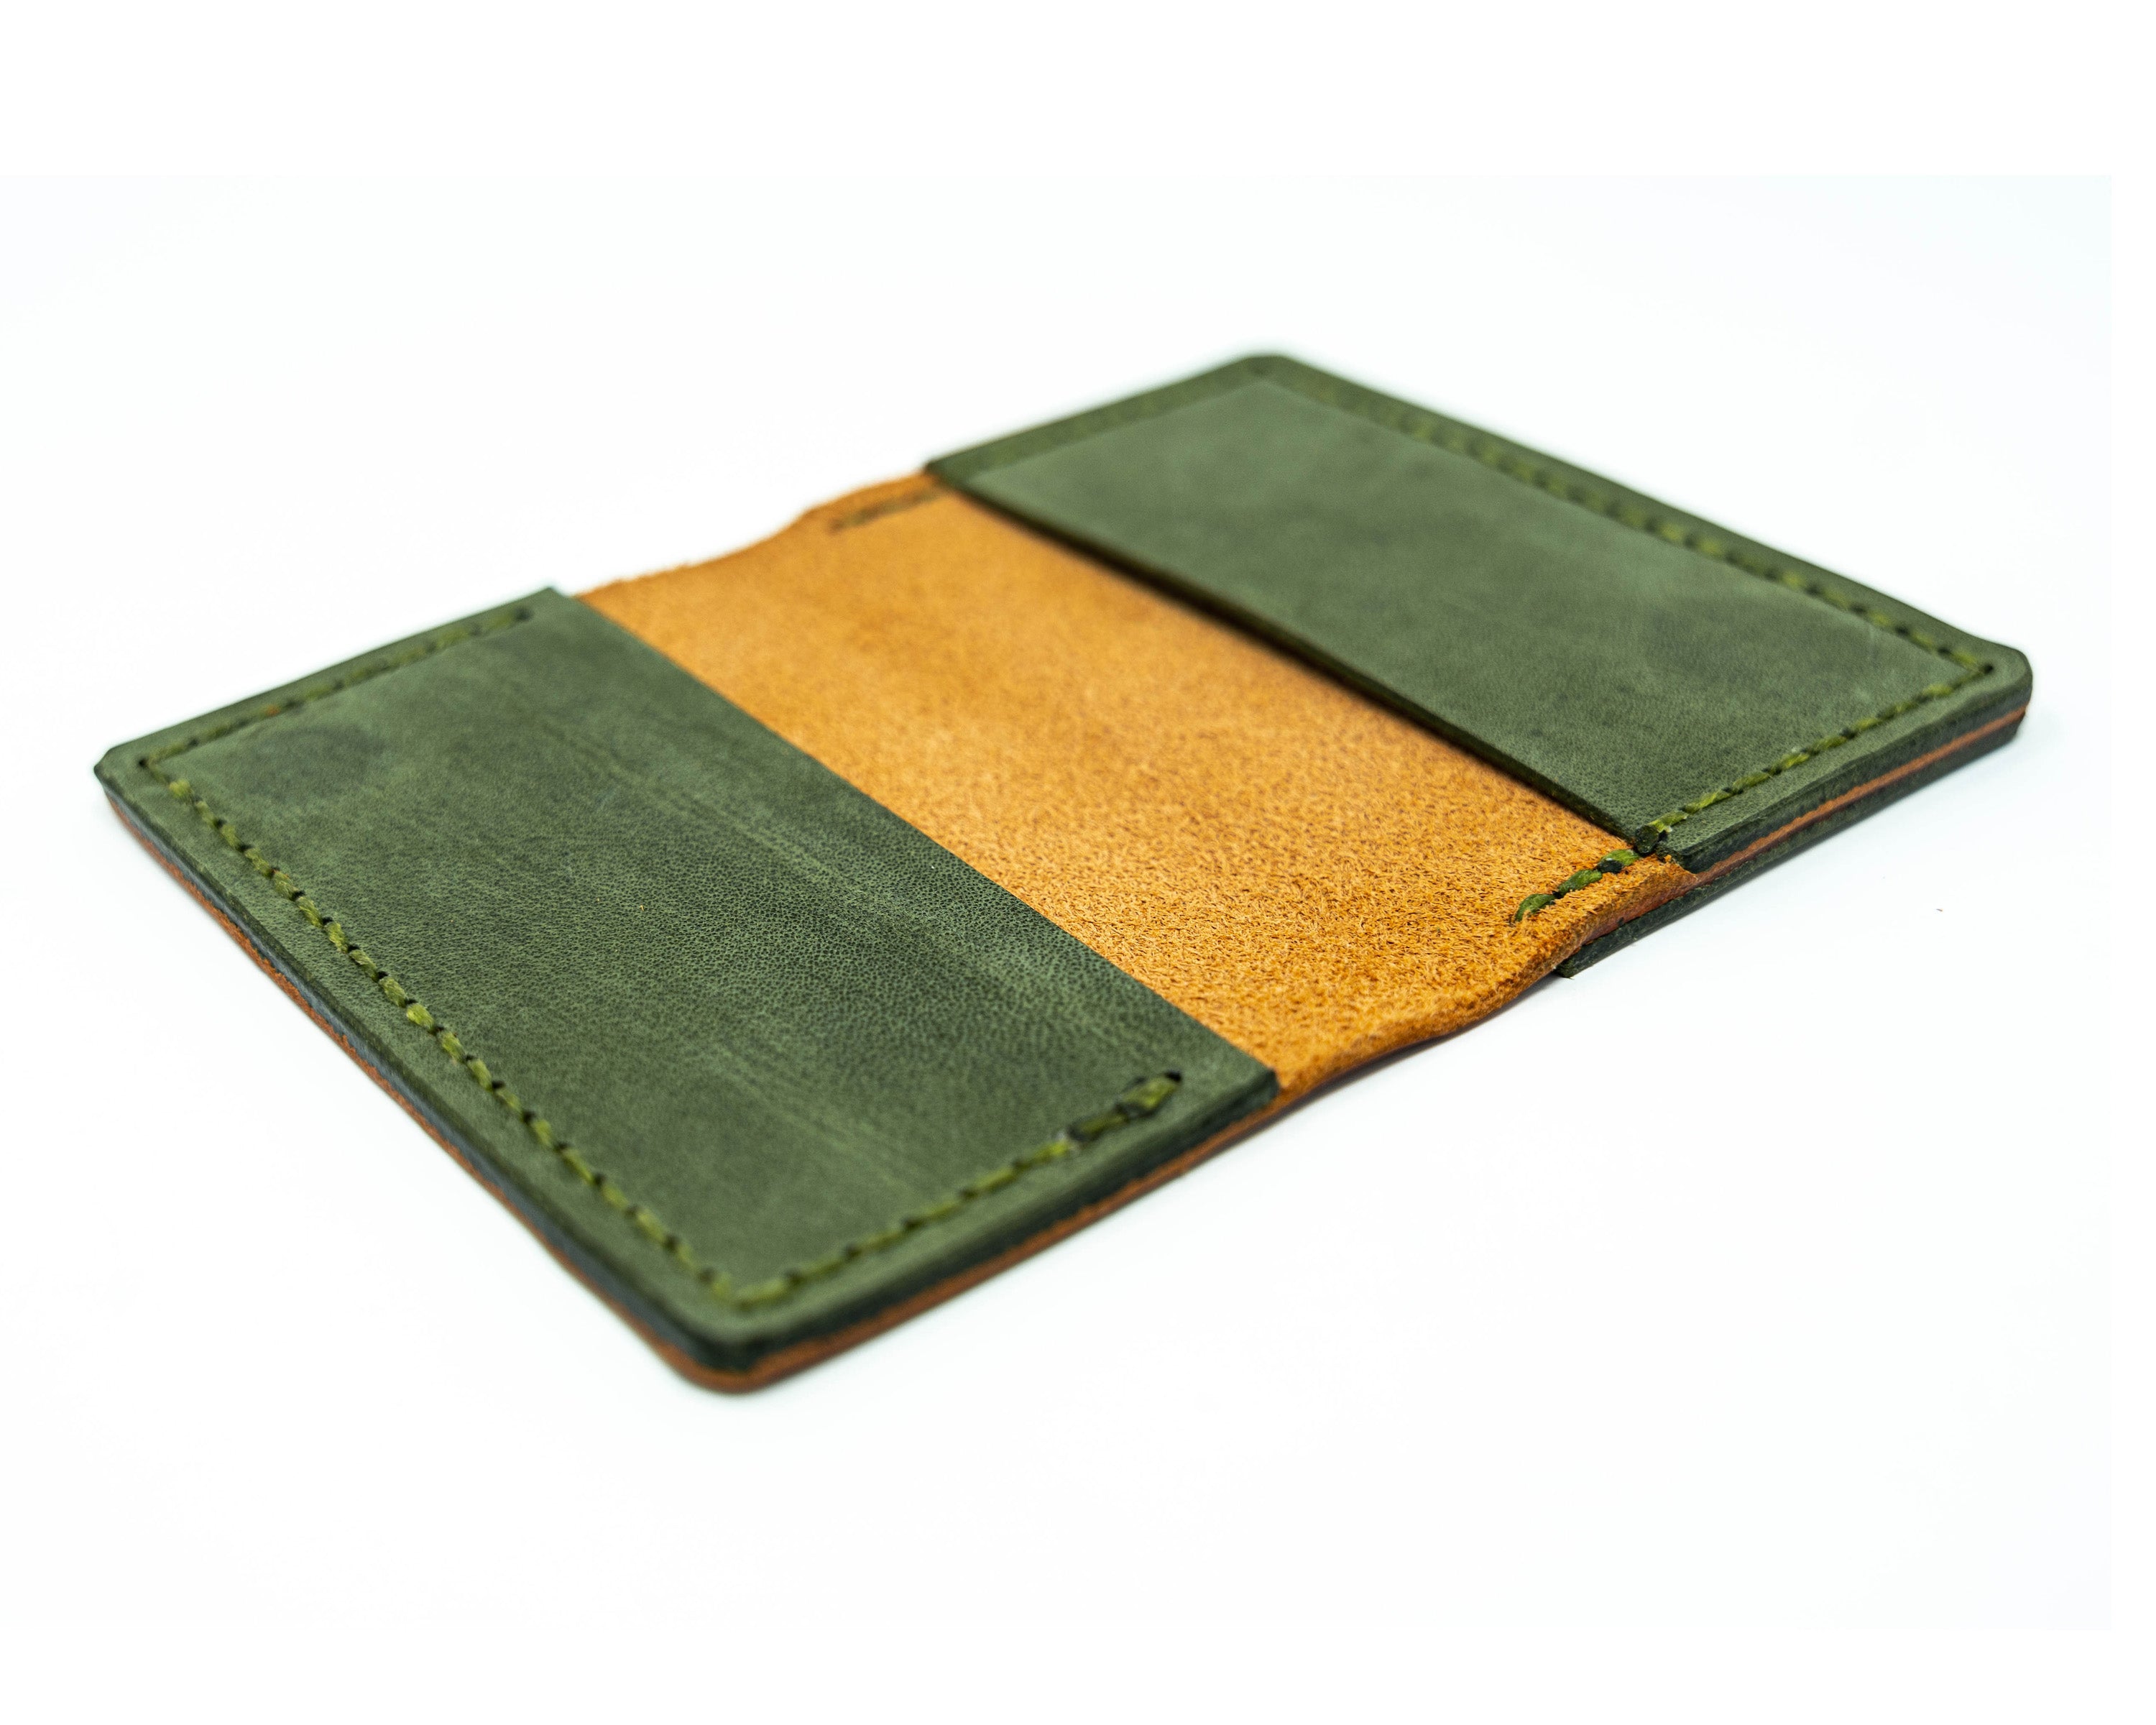 Offset overhead view of an open brown and green bifold wallet on a white background